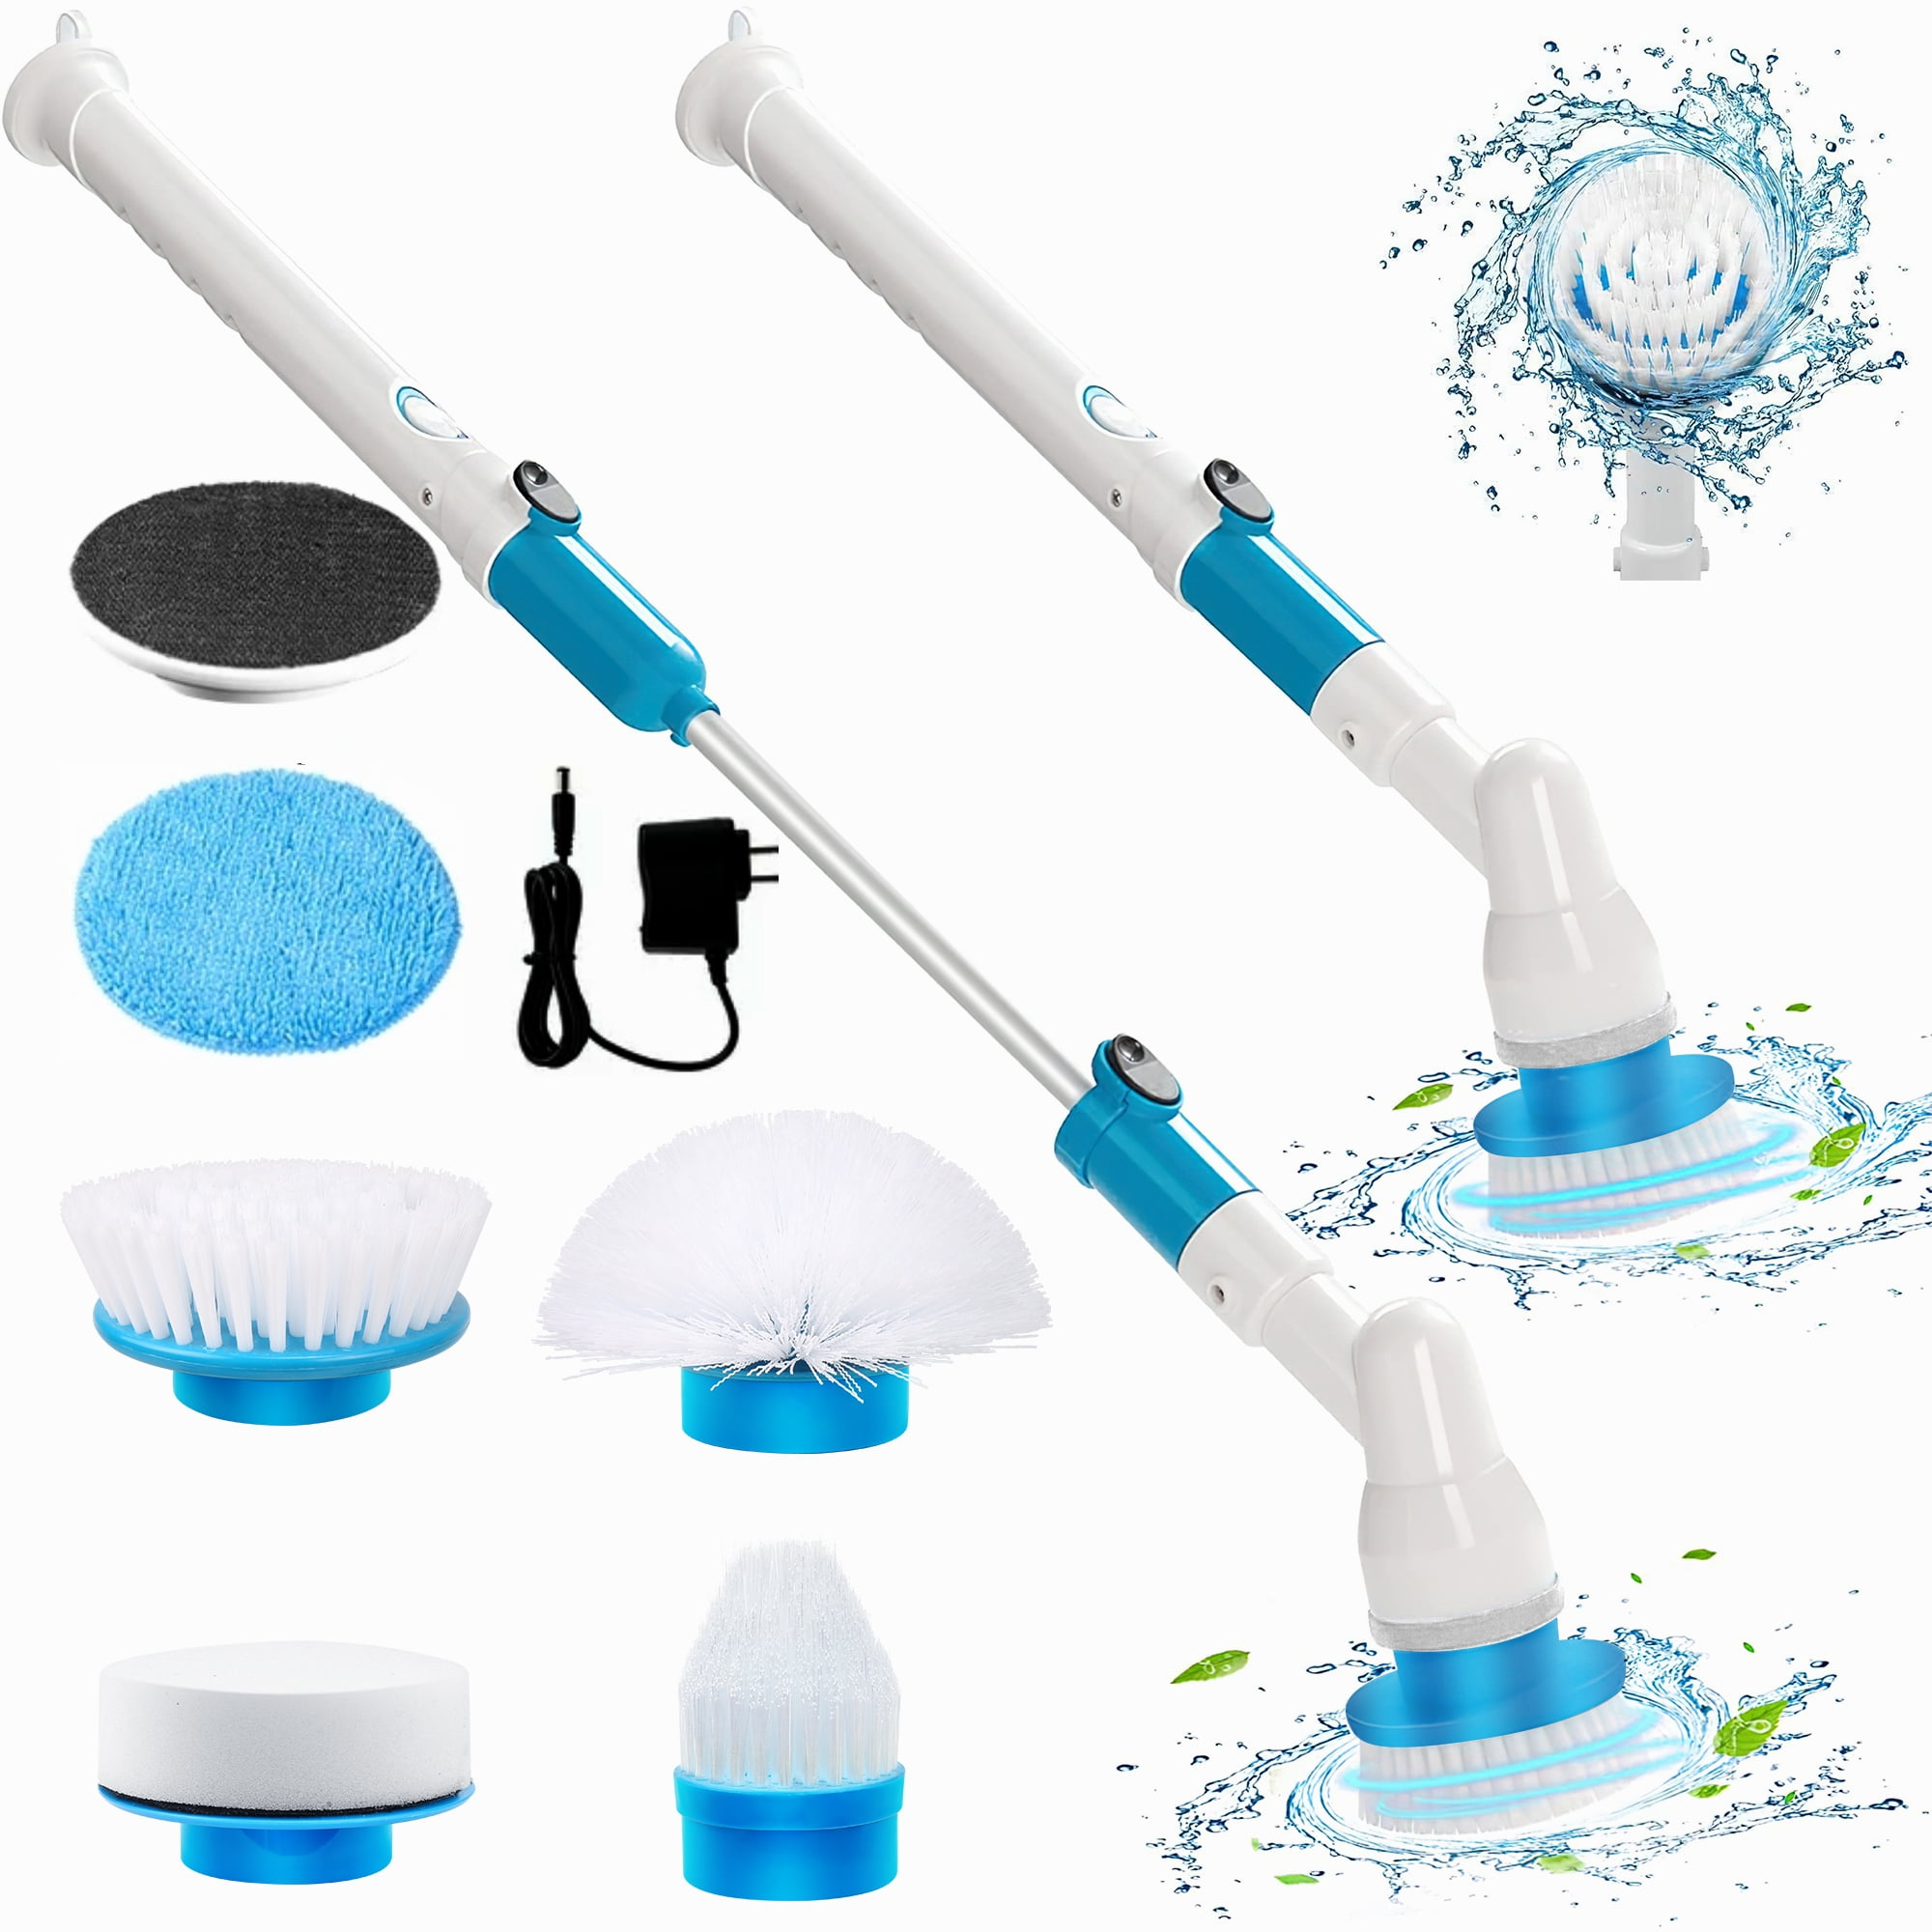 Fityle 3 x Turbo Scrub Electric Cleaning Brush Head Cleaner Tile Clean  Bathroom Kit, 1 - City Market